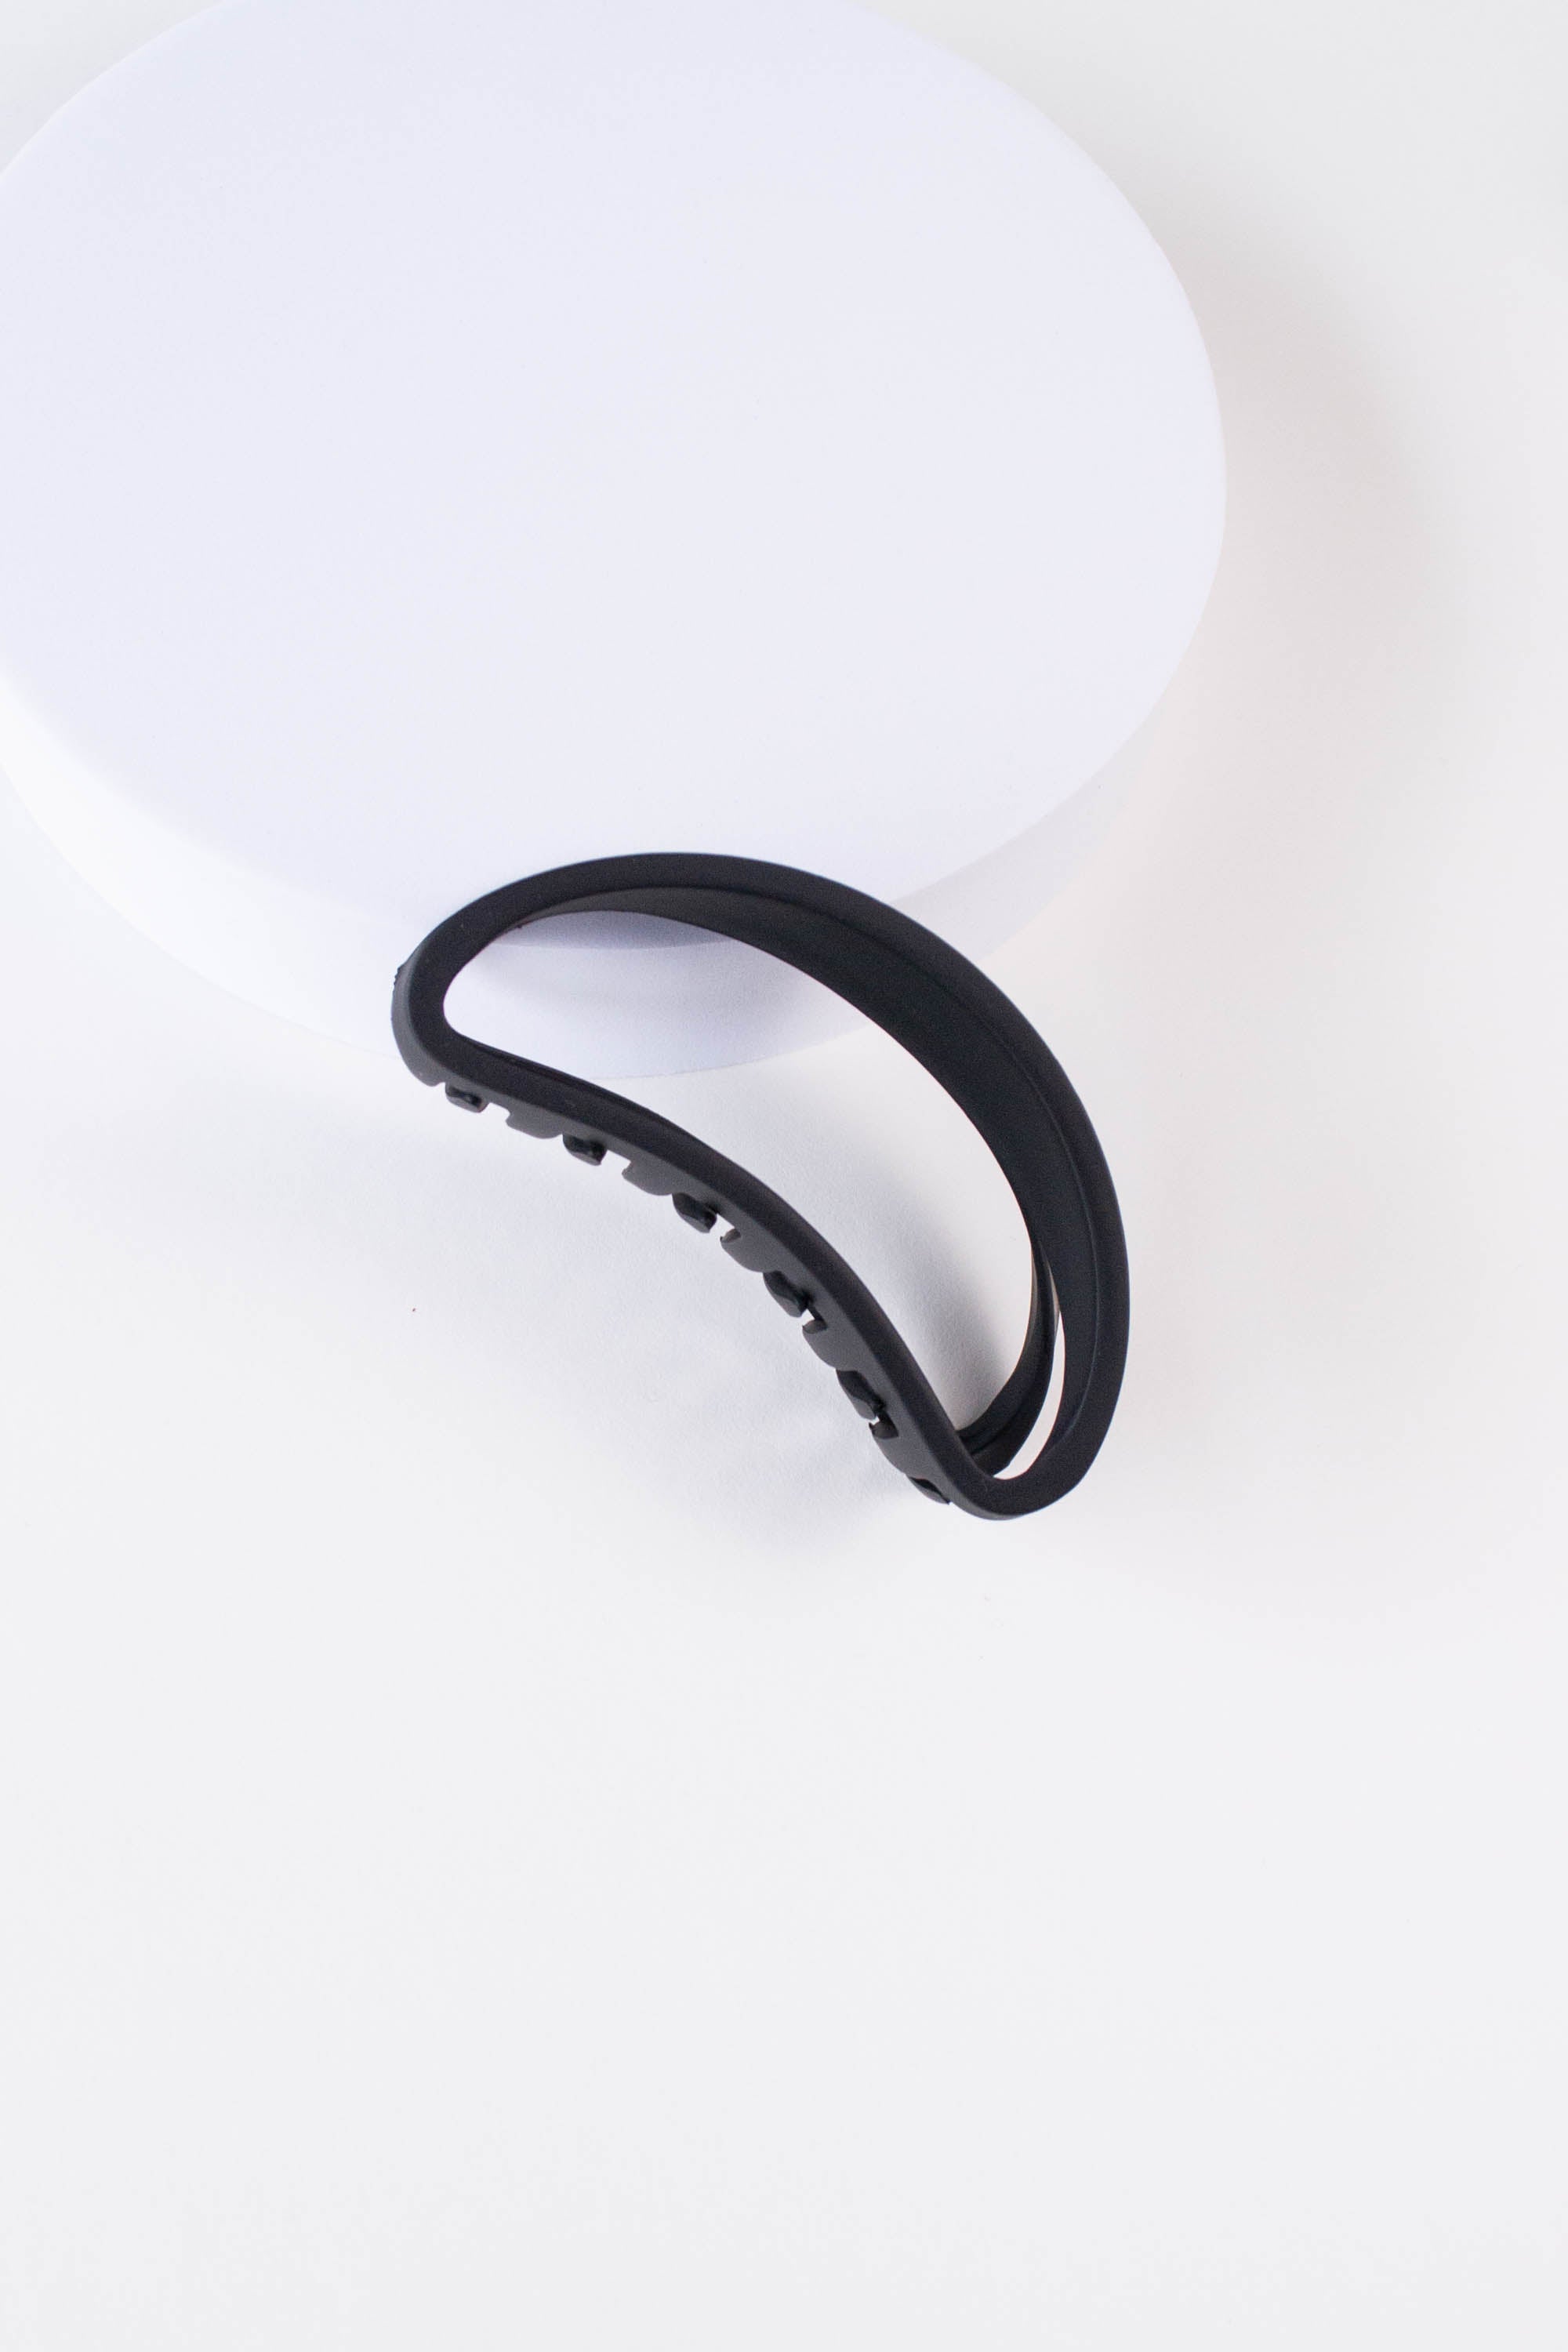 Bean shaped claw Casual design style clip